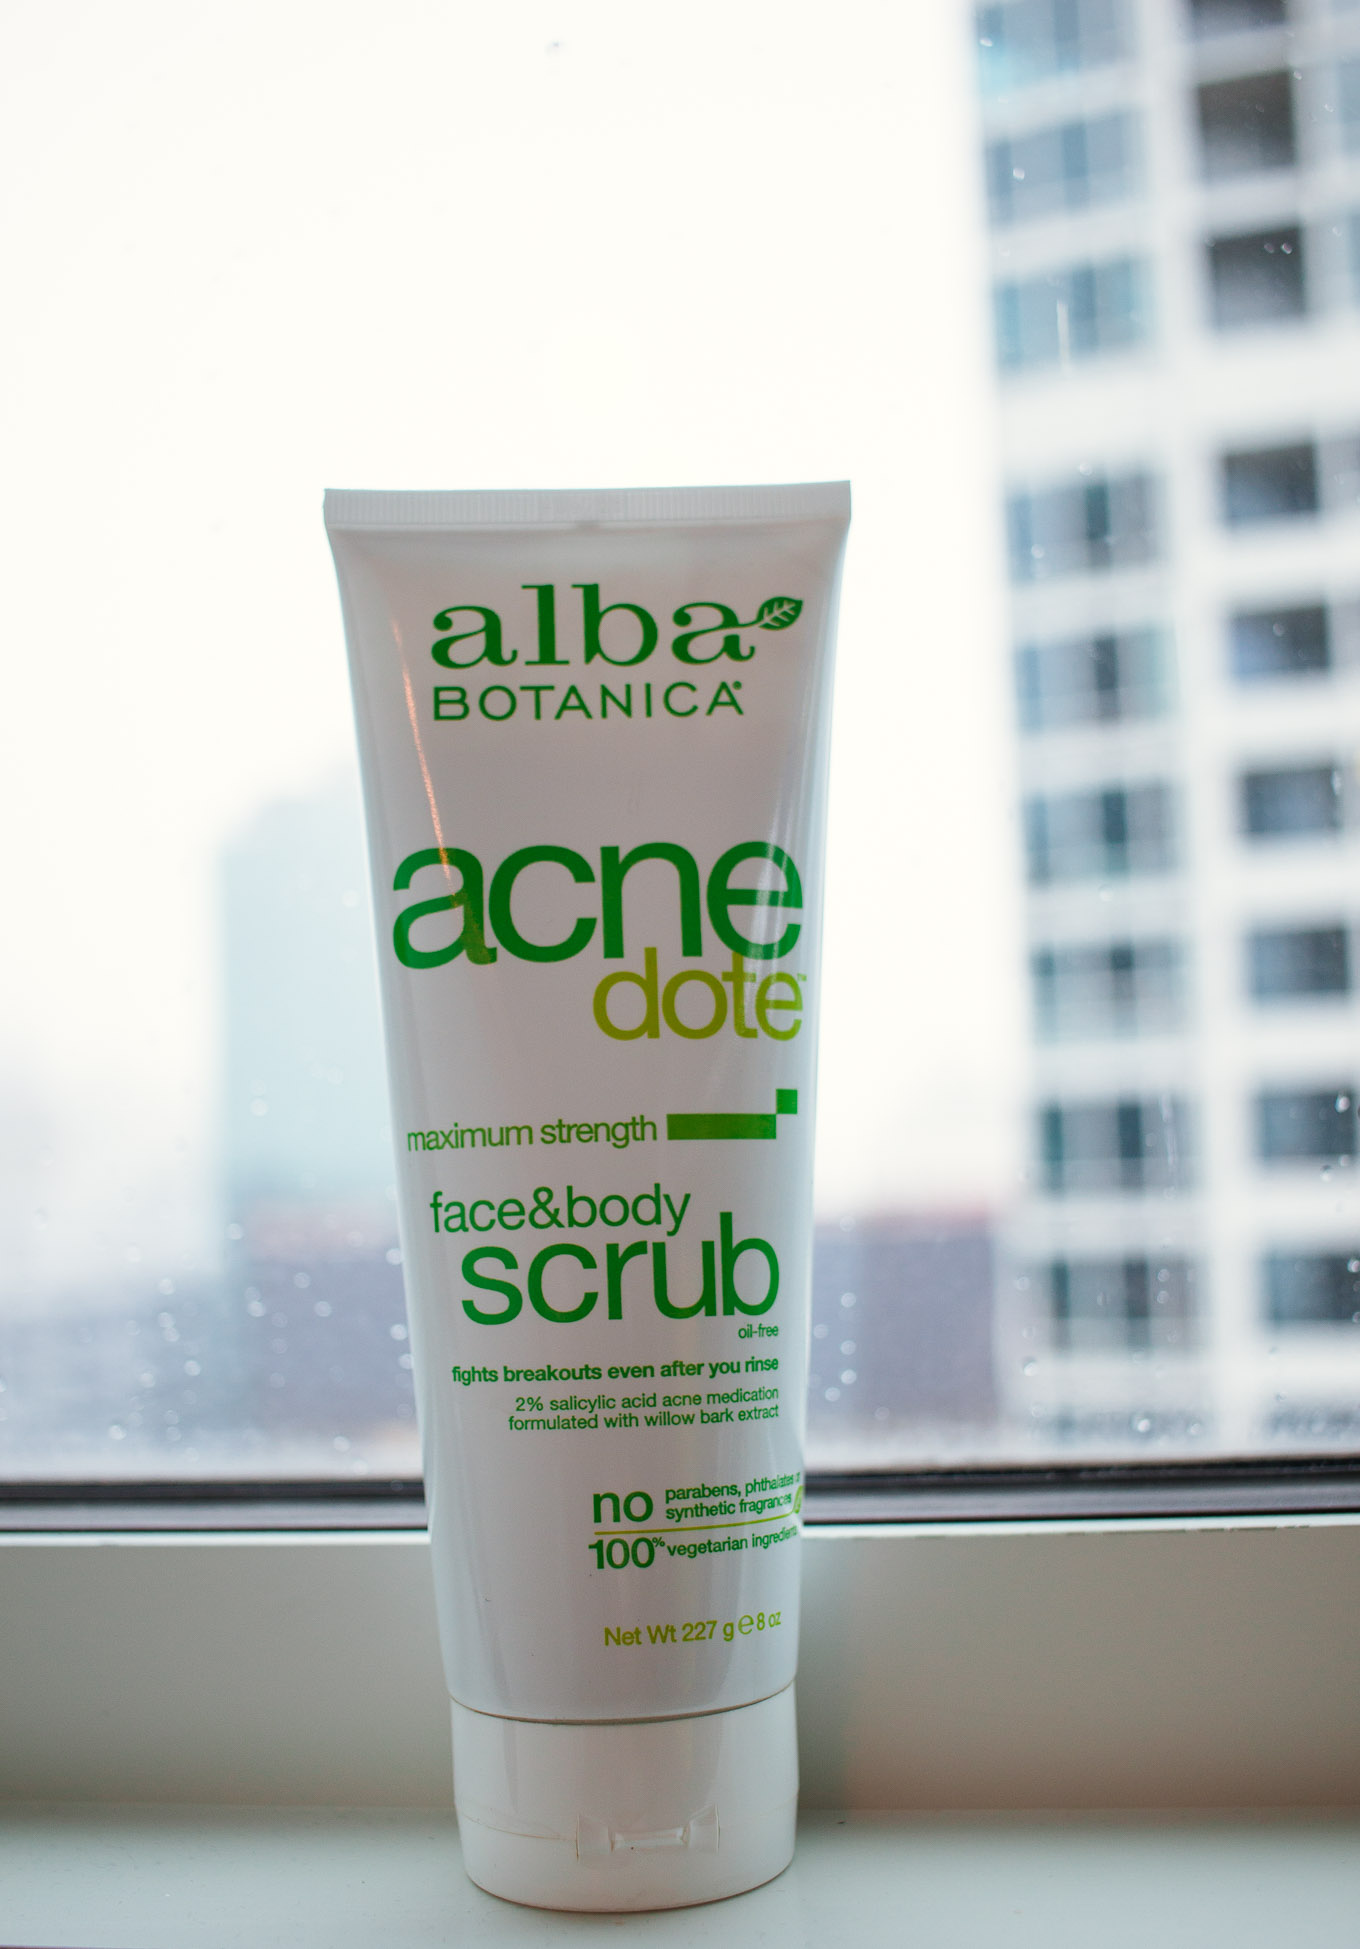 Lifestyle blogger Roxanne of Glass of Glam's review of the Alba Botanica Acnedote scrub and Fast Fix for a pimple